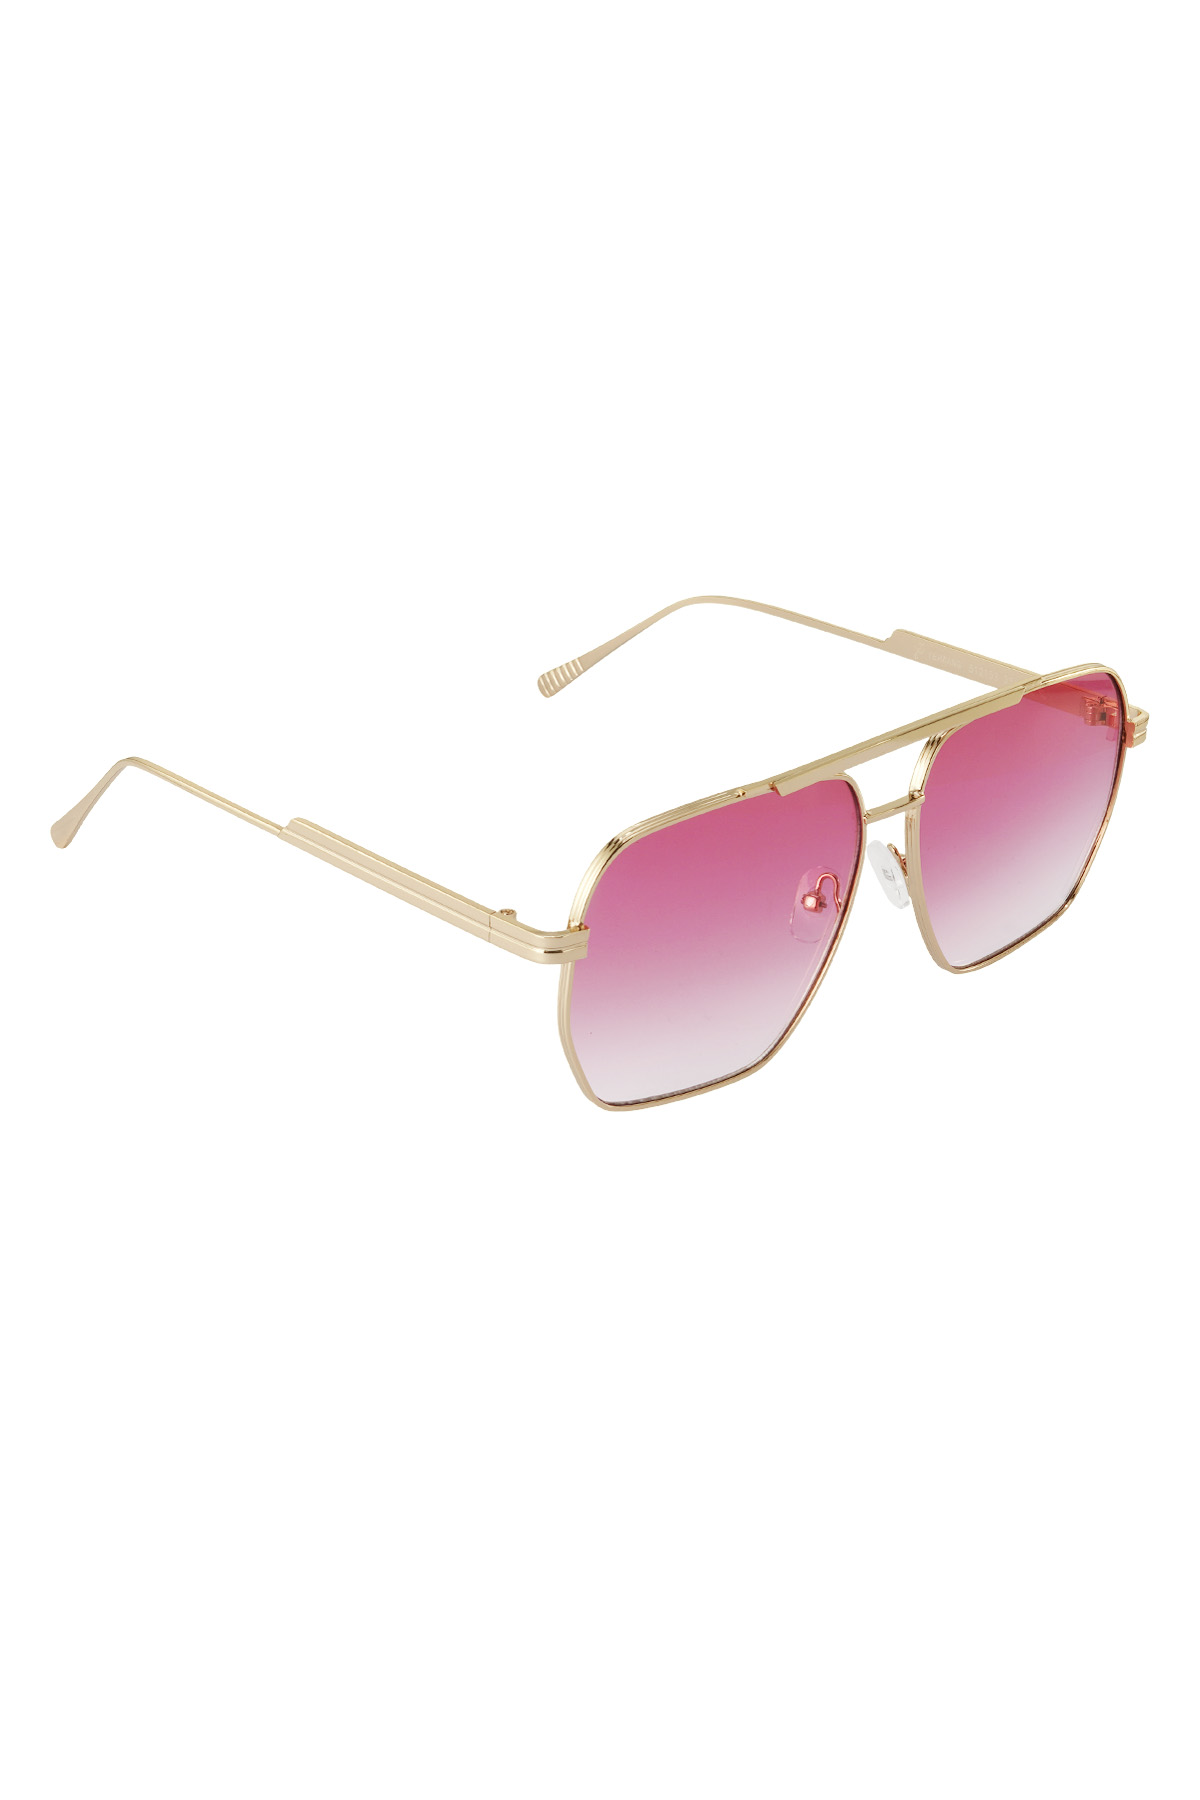 Metal summer sunglasses - Pink and gold